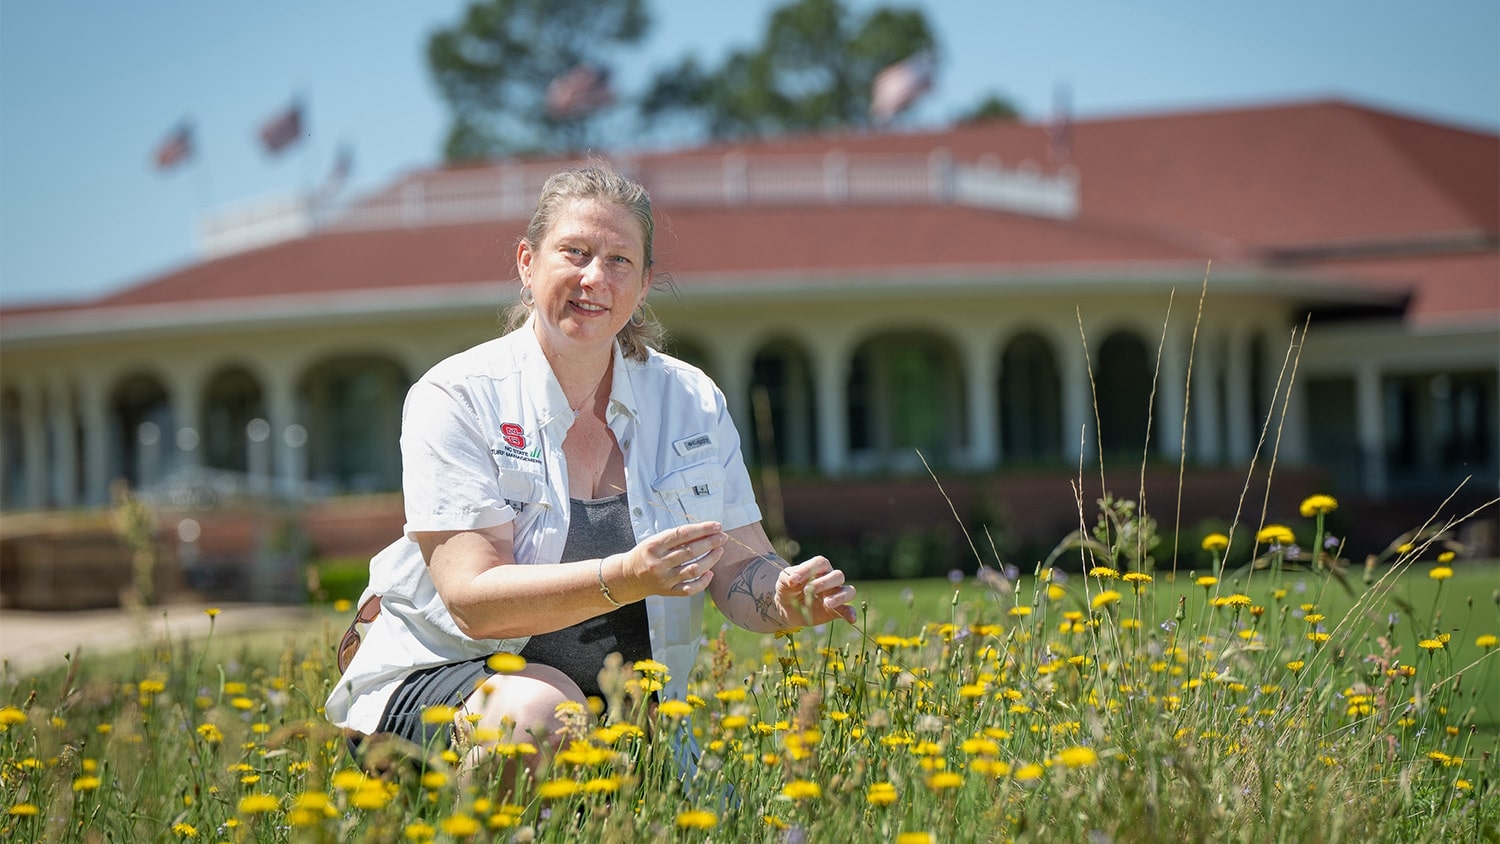 Danesha Seth Carley works in a pollinator garden in front of the clubhouse at the Pinehurst golf course.